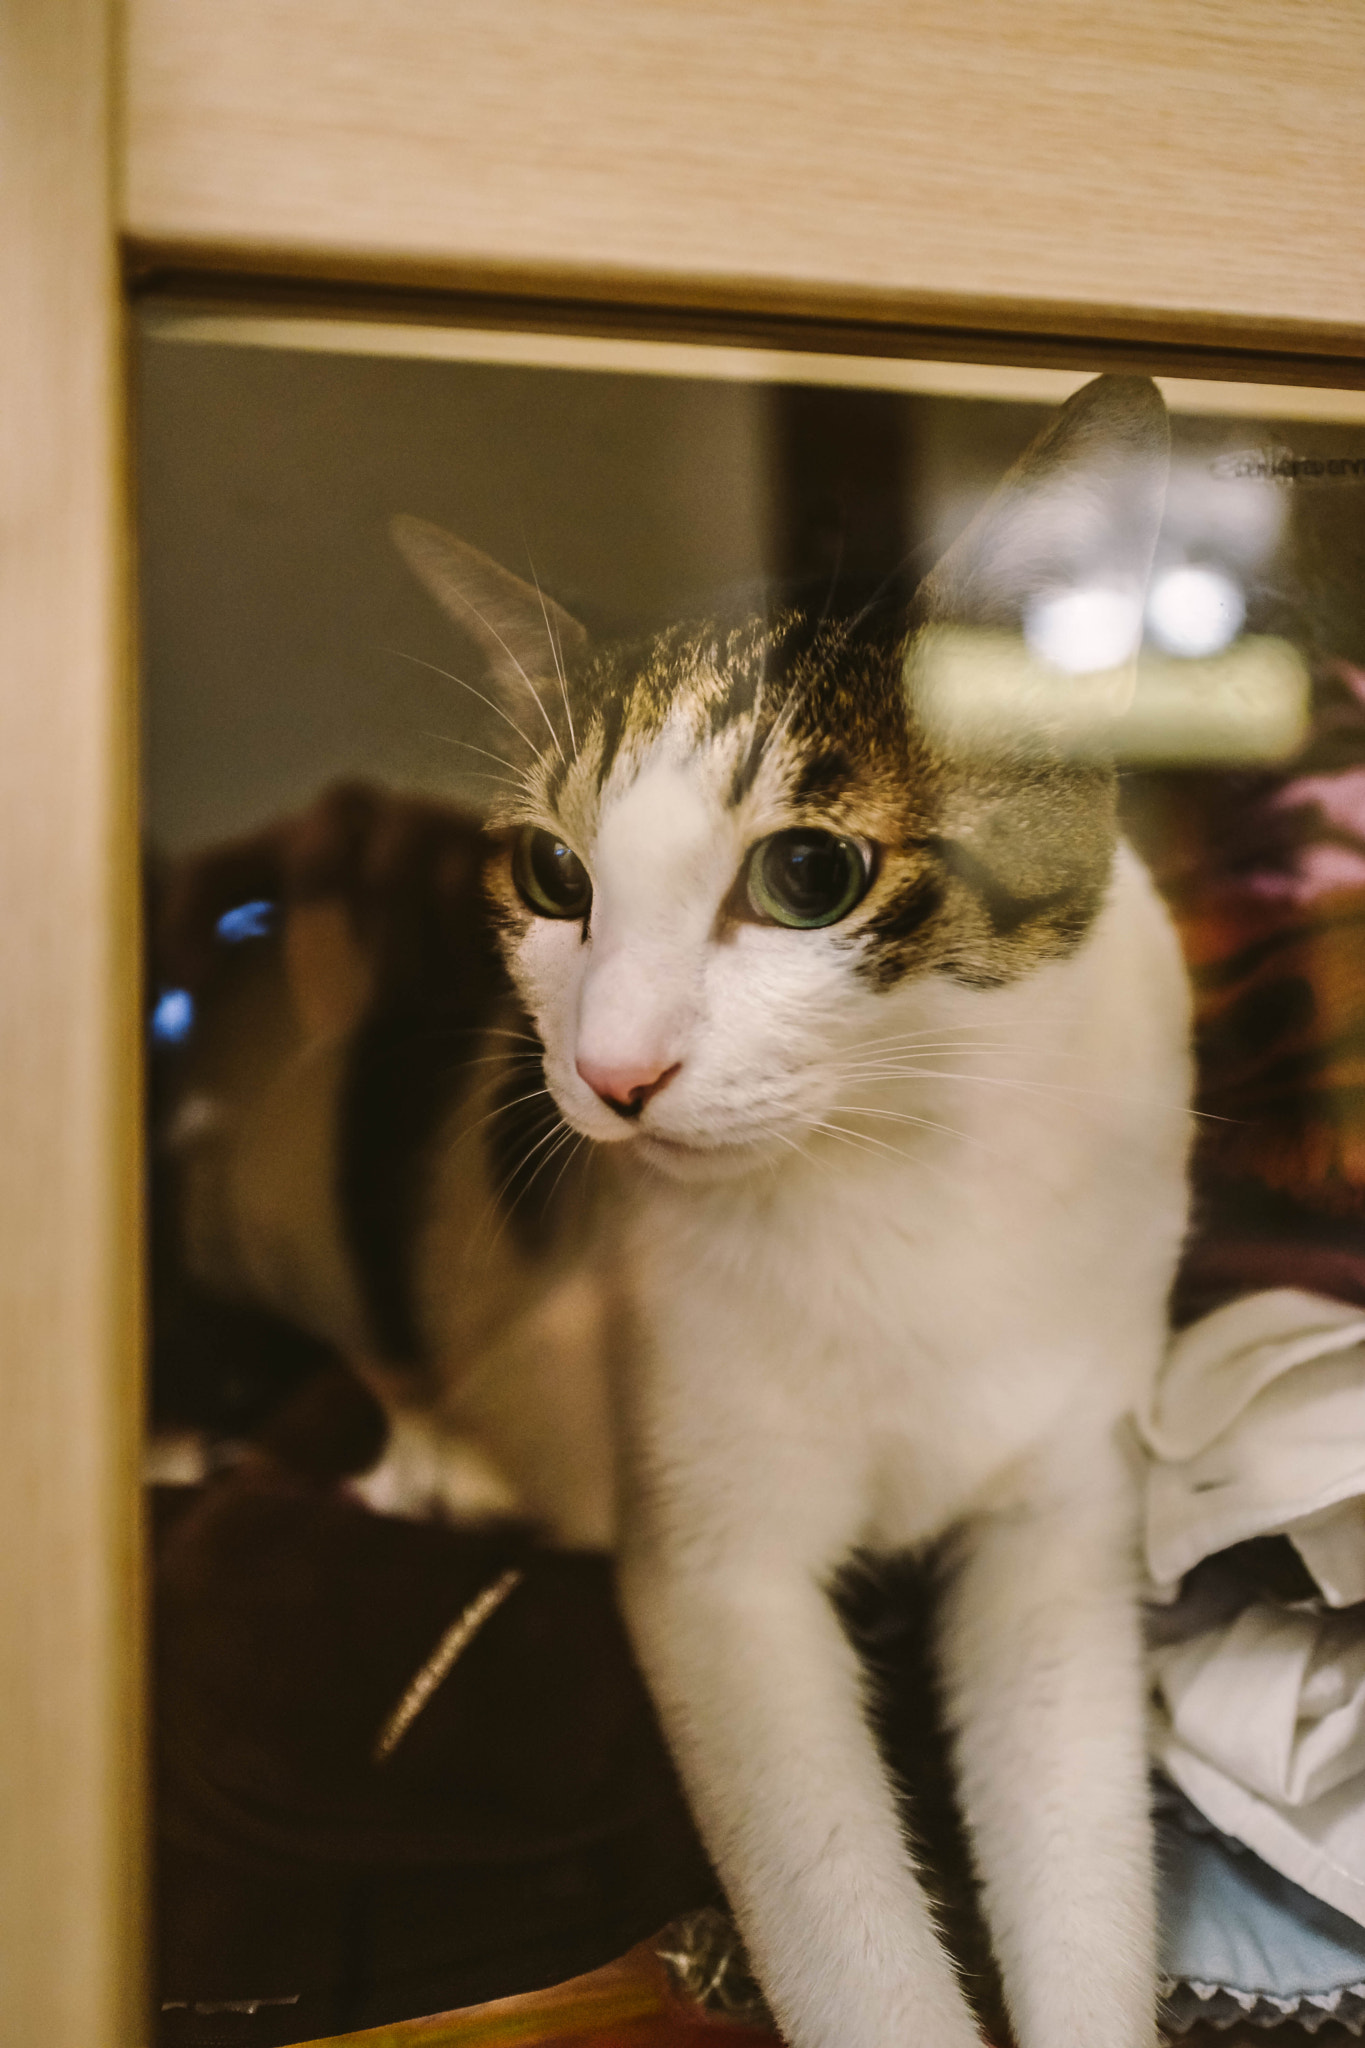 Sony a99 II sample photo. My cat is in the closet photography